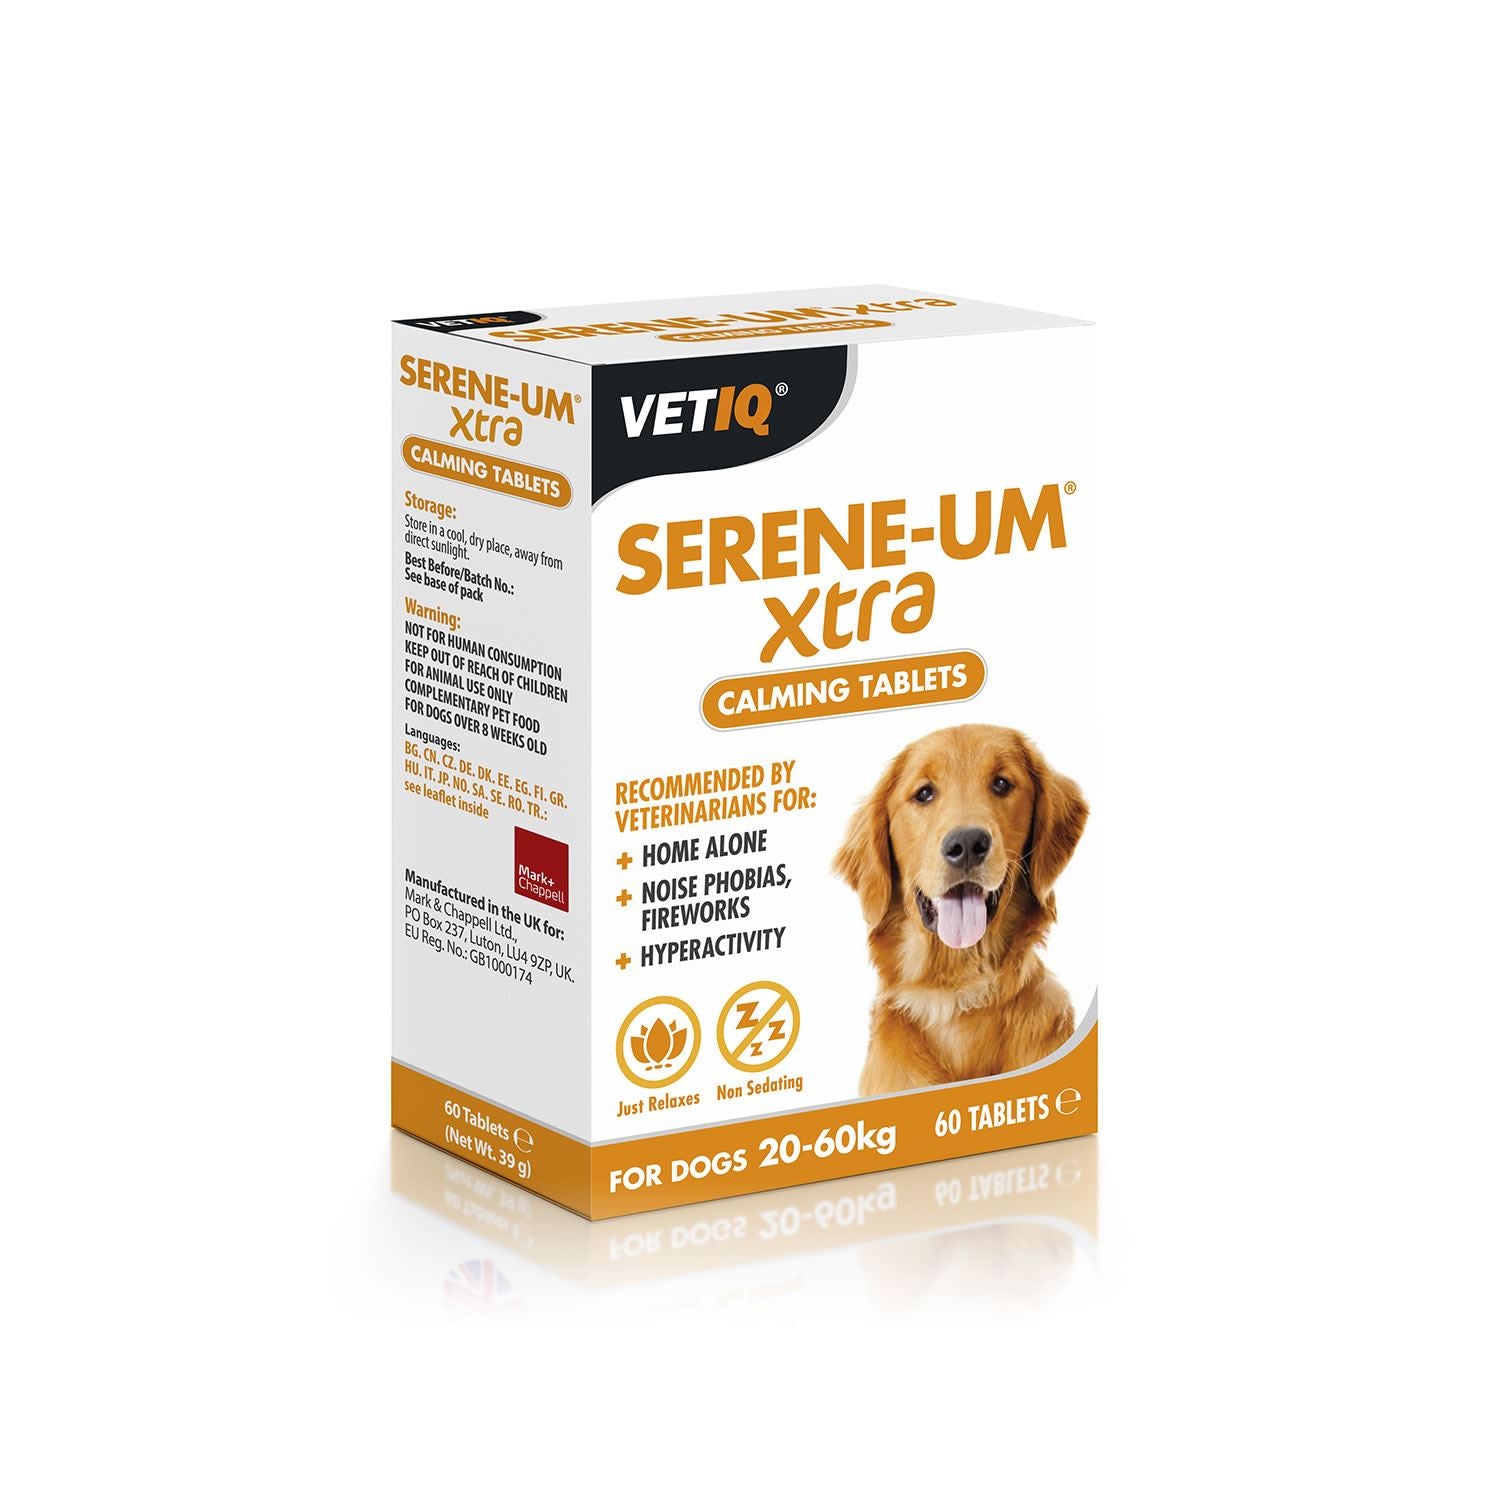 Vetiq Serene-Um Xtra Calming Tablets For Dogs 20-60Kg - Just Horse Riders